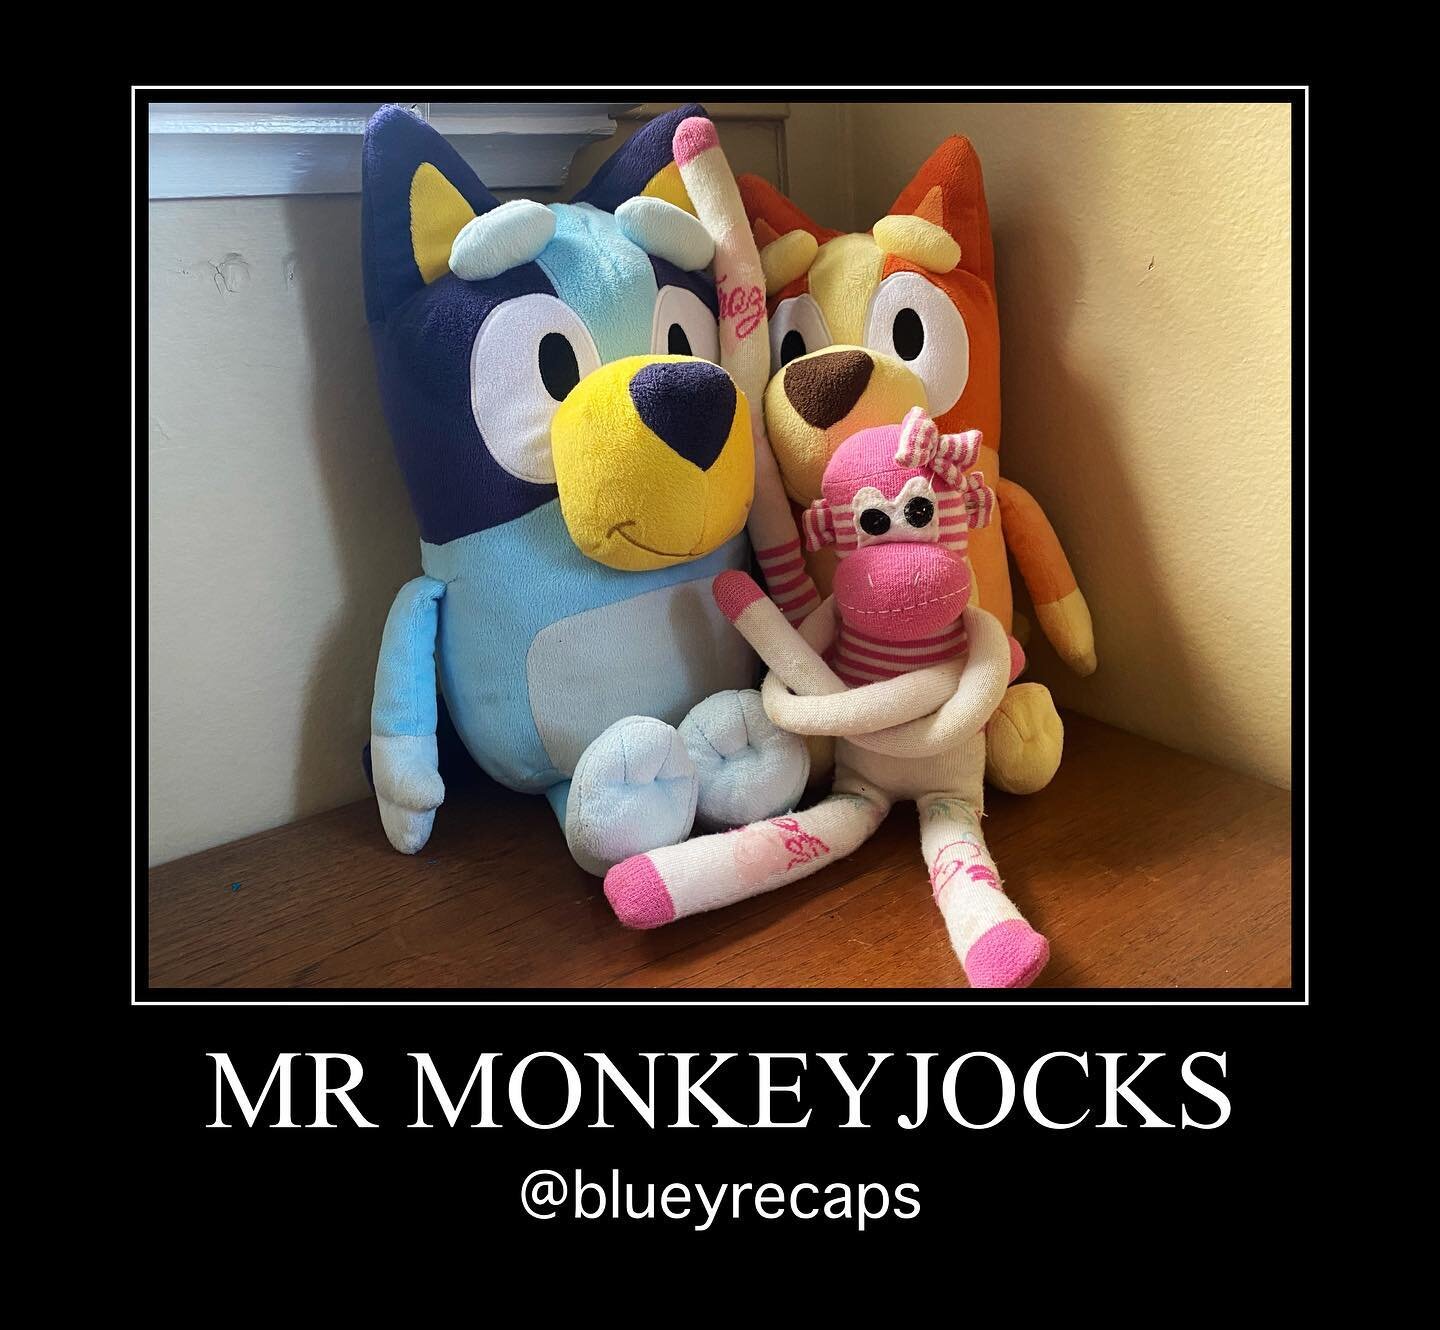 Bluey Recap: Mr Monkeyjocks (#2.31)
#bestbits: accurate depiction of every parent in the lead up to Christmas
#lifelesson: never trust a monkey in jocks, when you get everything you want, nothing feels special
.
Bluey is in the messy playroom circlin